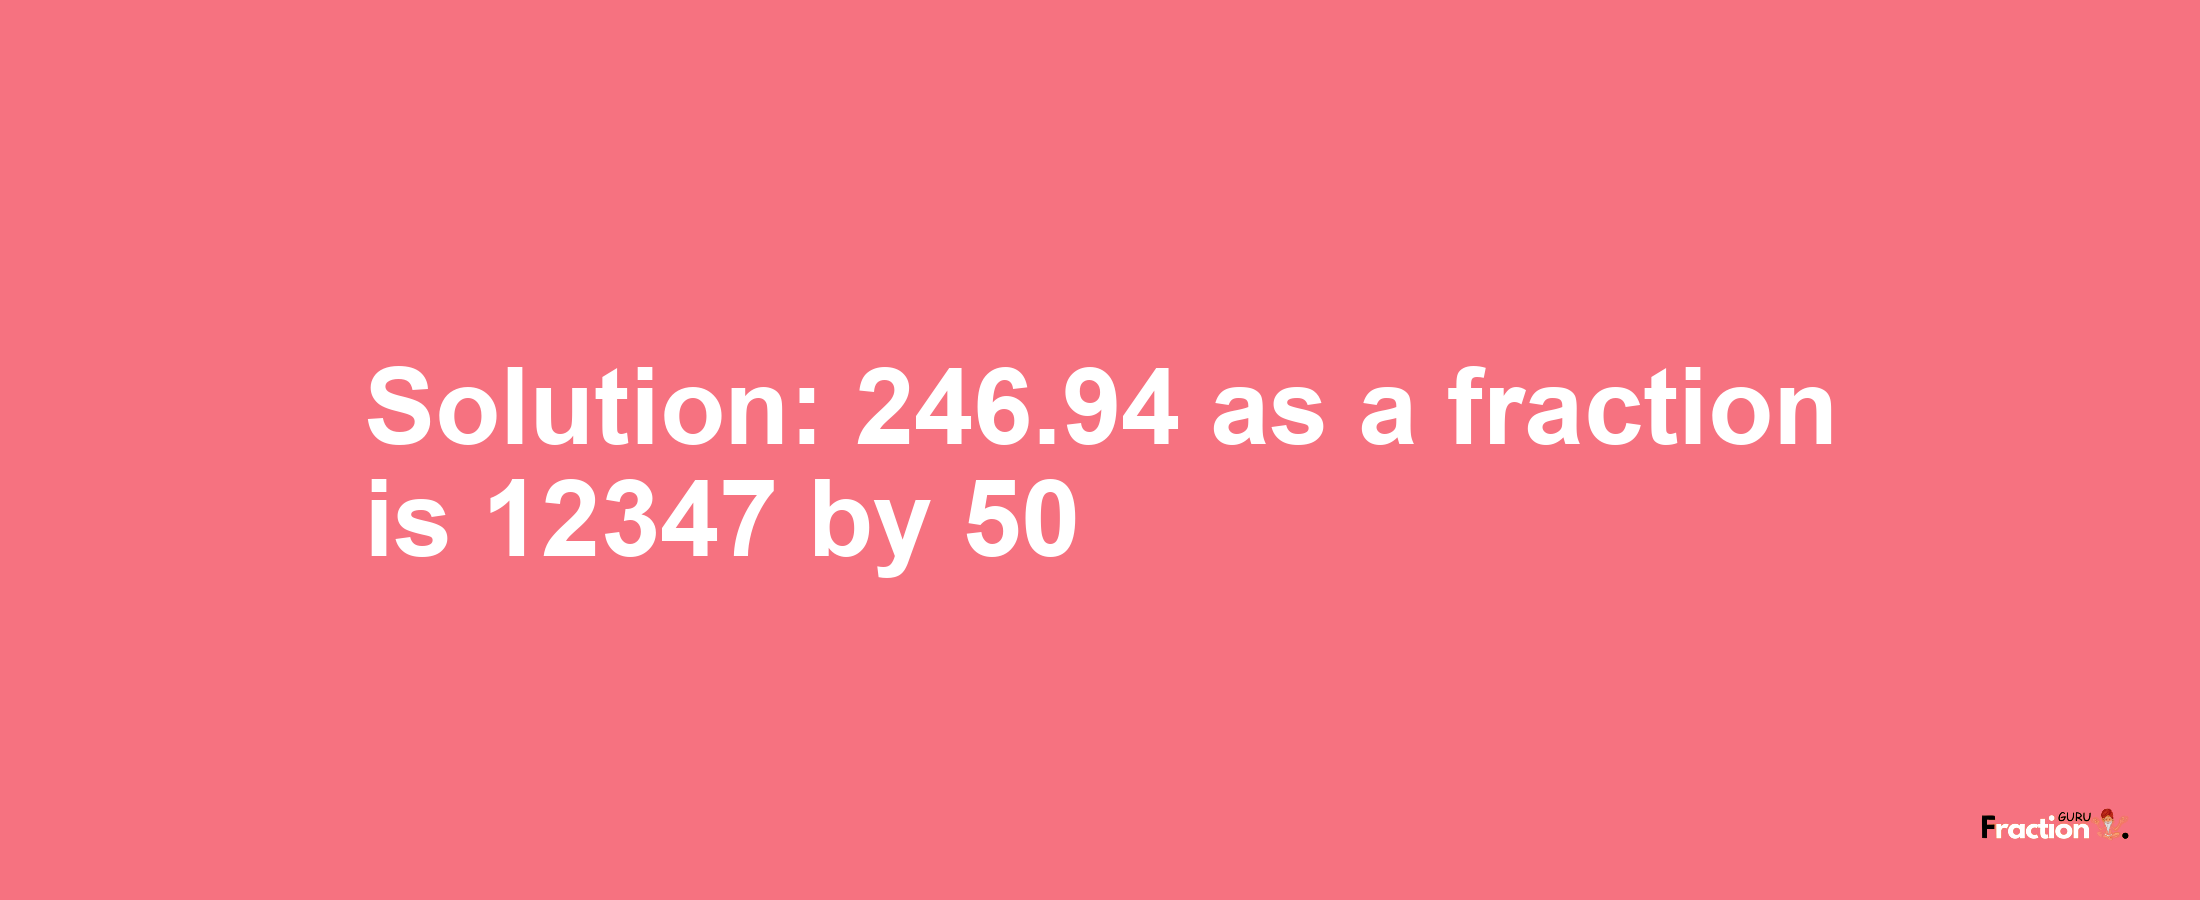 Solution:246.94 as a fraction is 12347/50